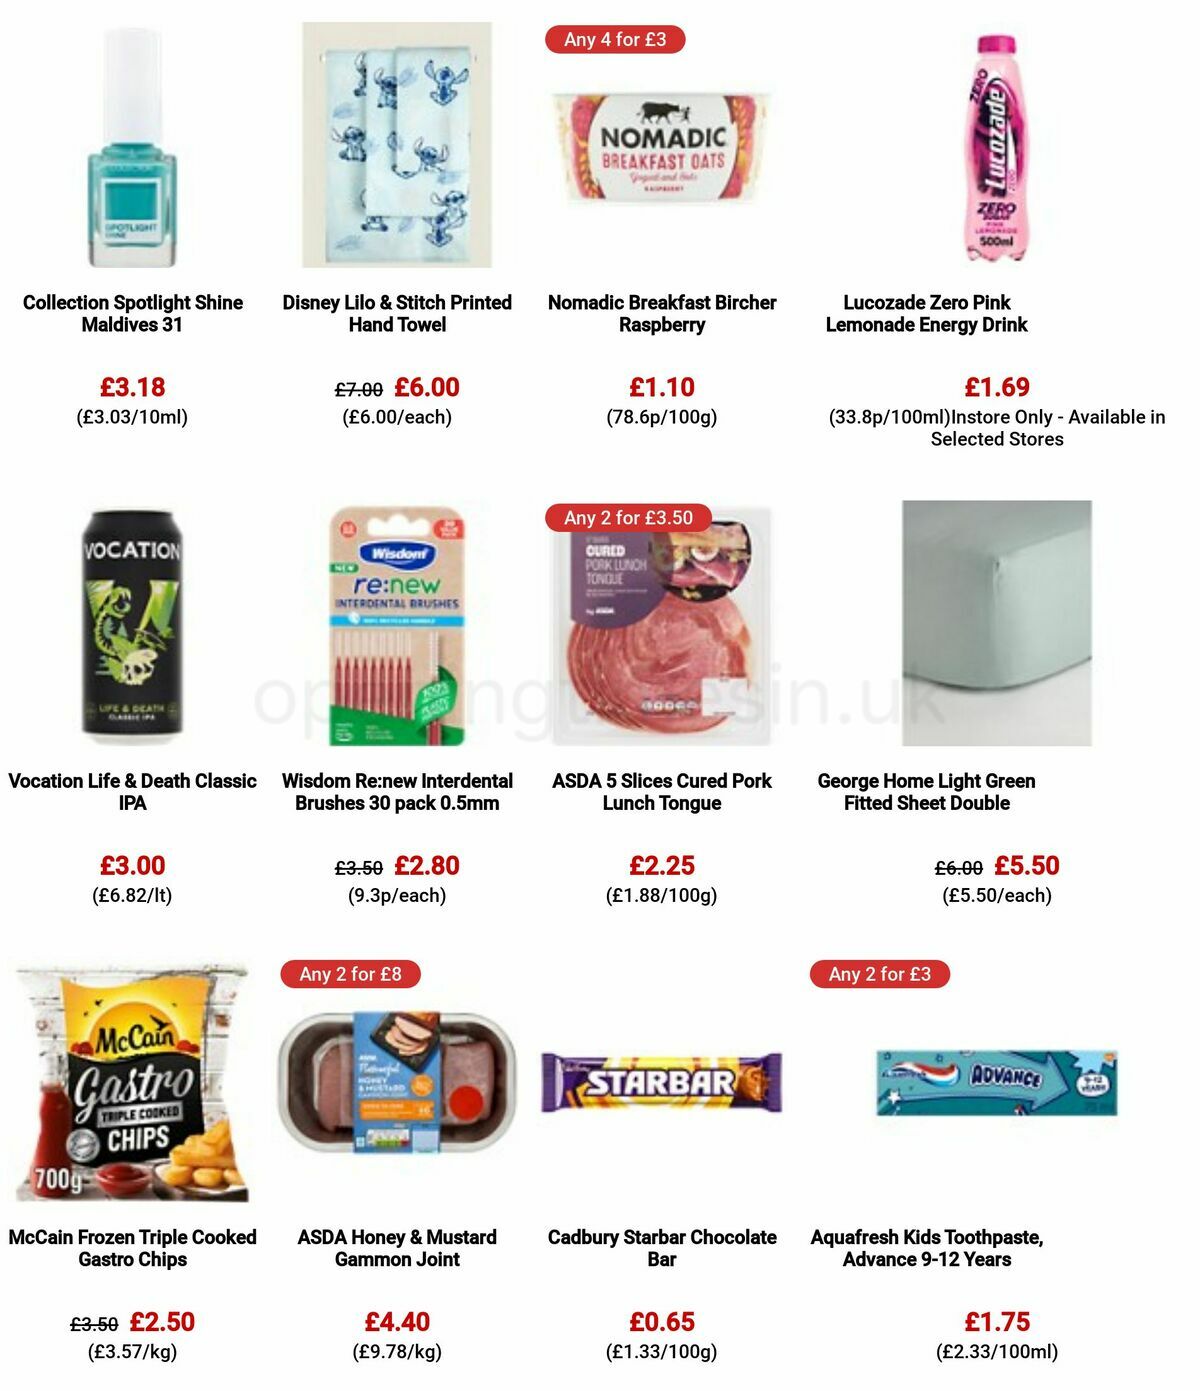 ASDA Offers from 13 April